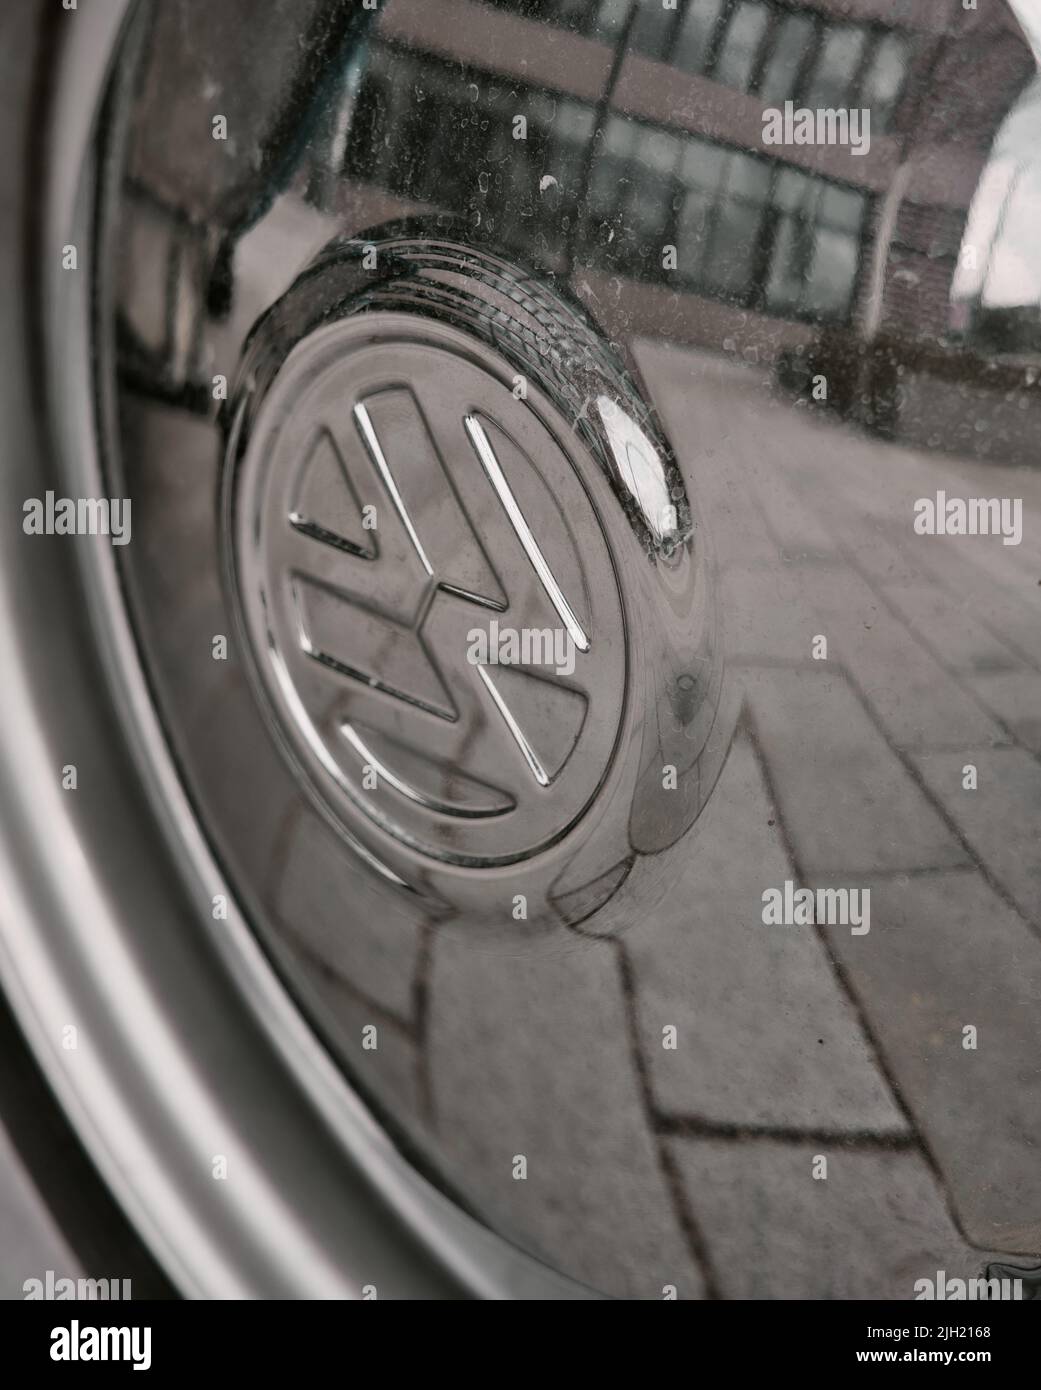 The vertical close-up Volkswagen logo on the car petrol cap Stock Photo